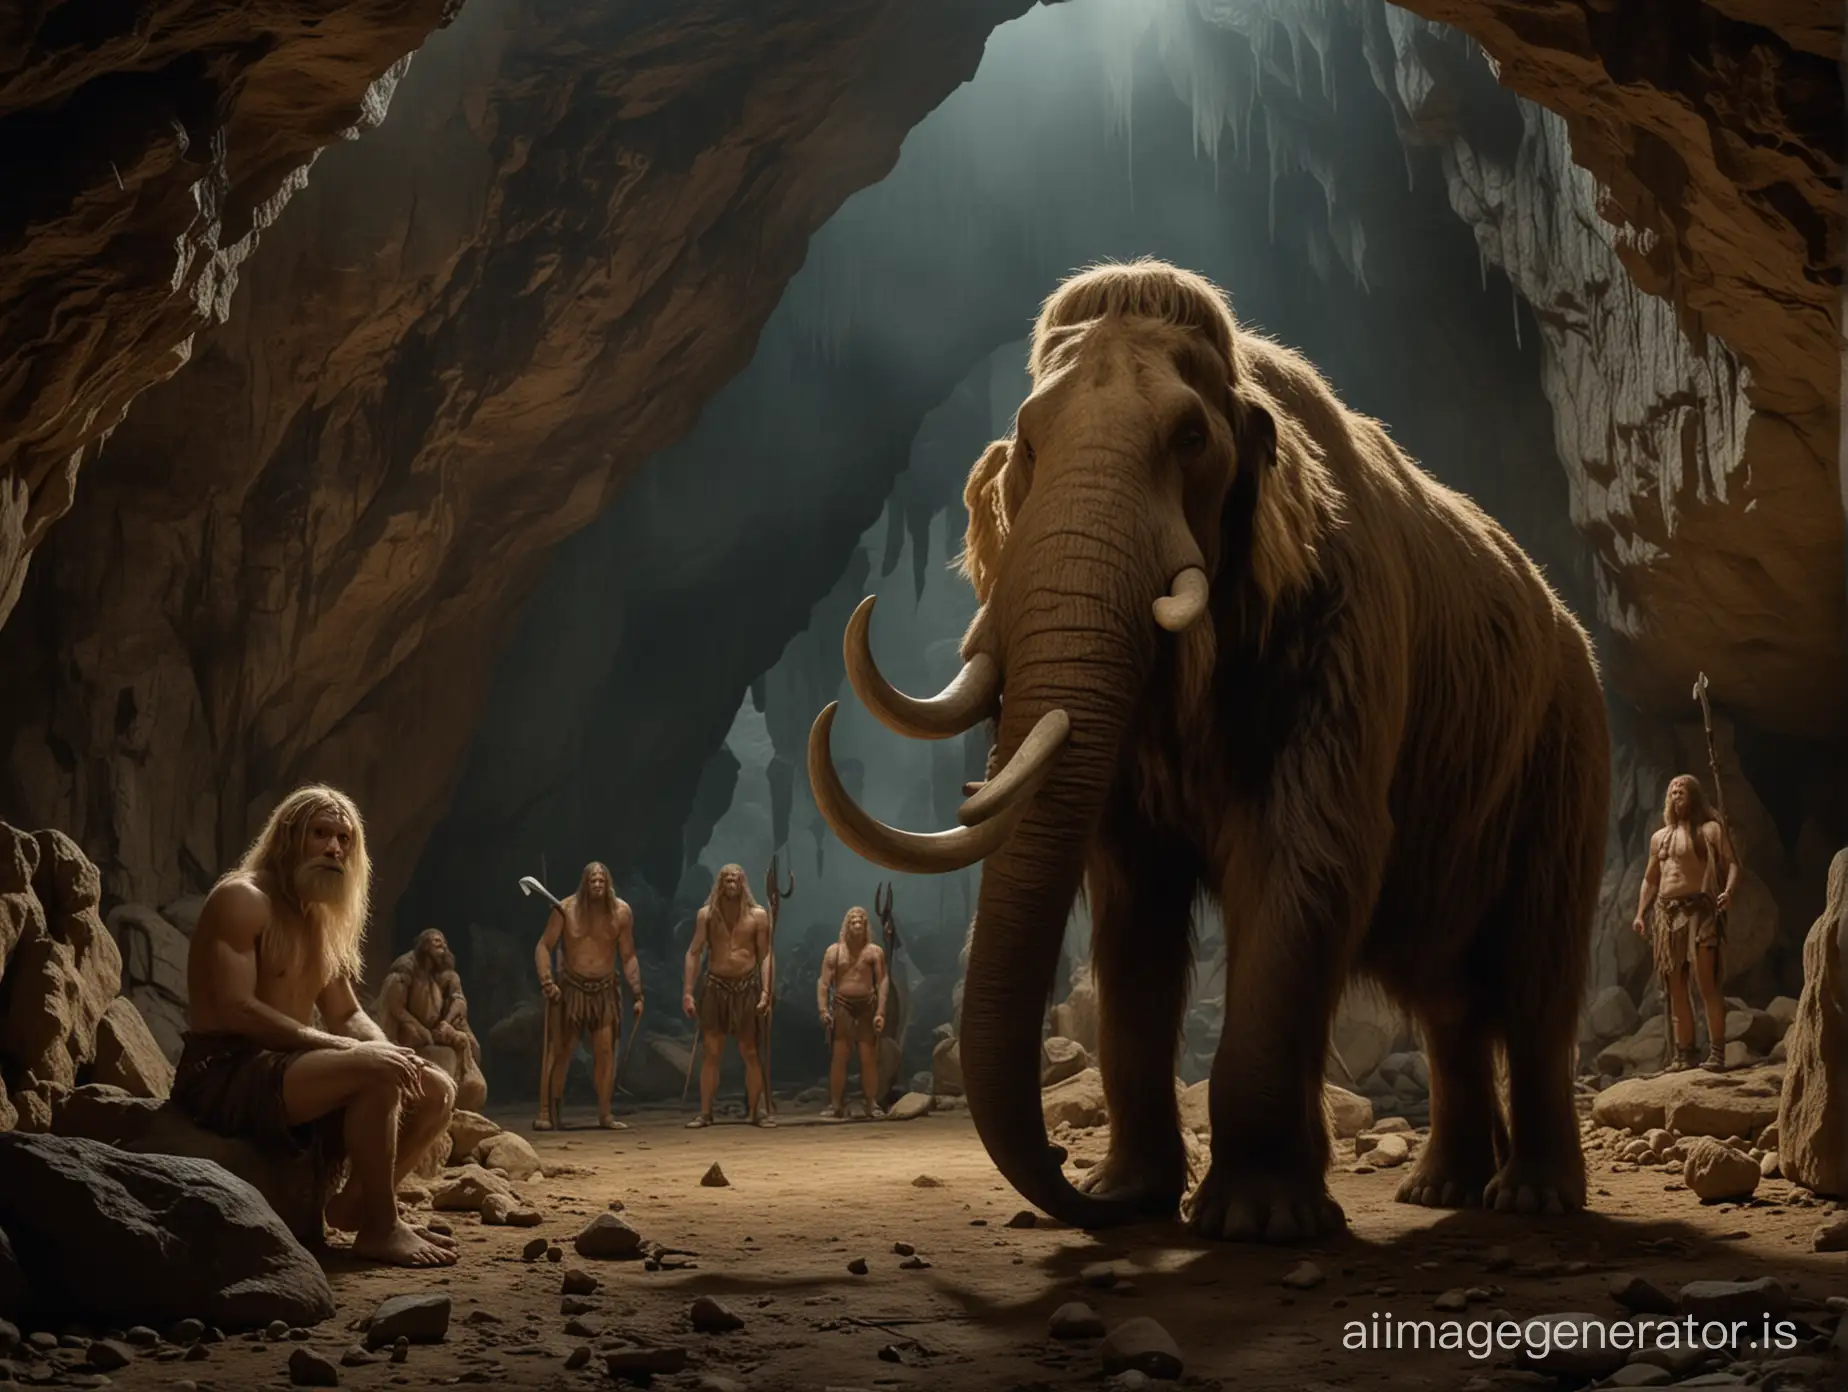 Prehistoric-Cave-Cinema-Blond-Figure-and-Mammoth-with-Neanderthal-Warriors